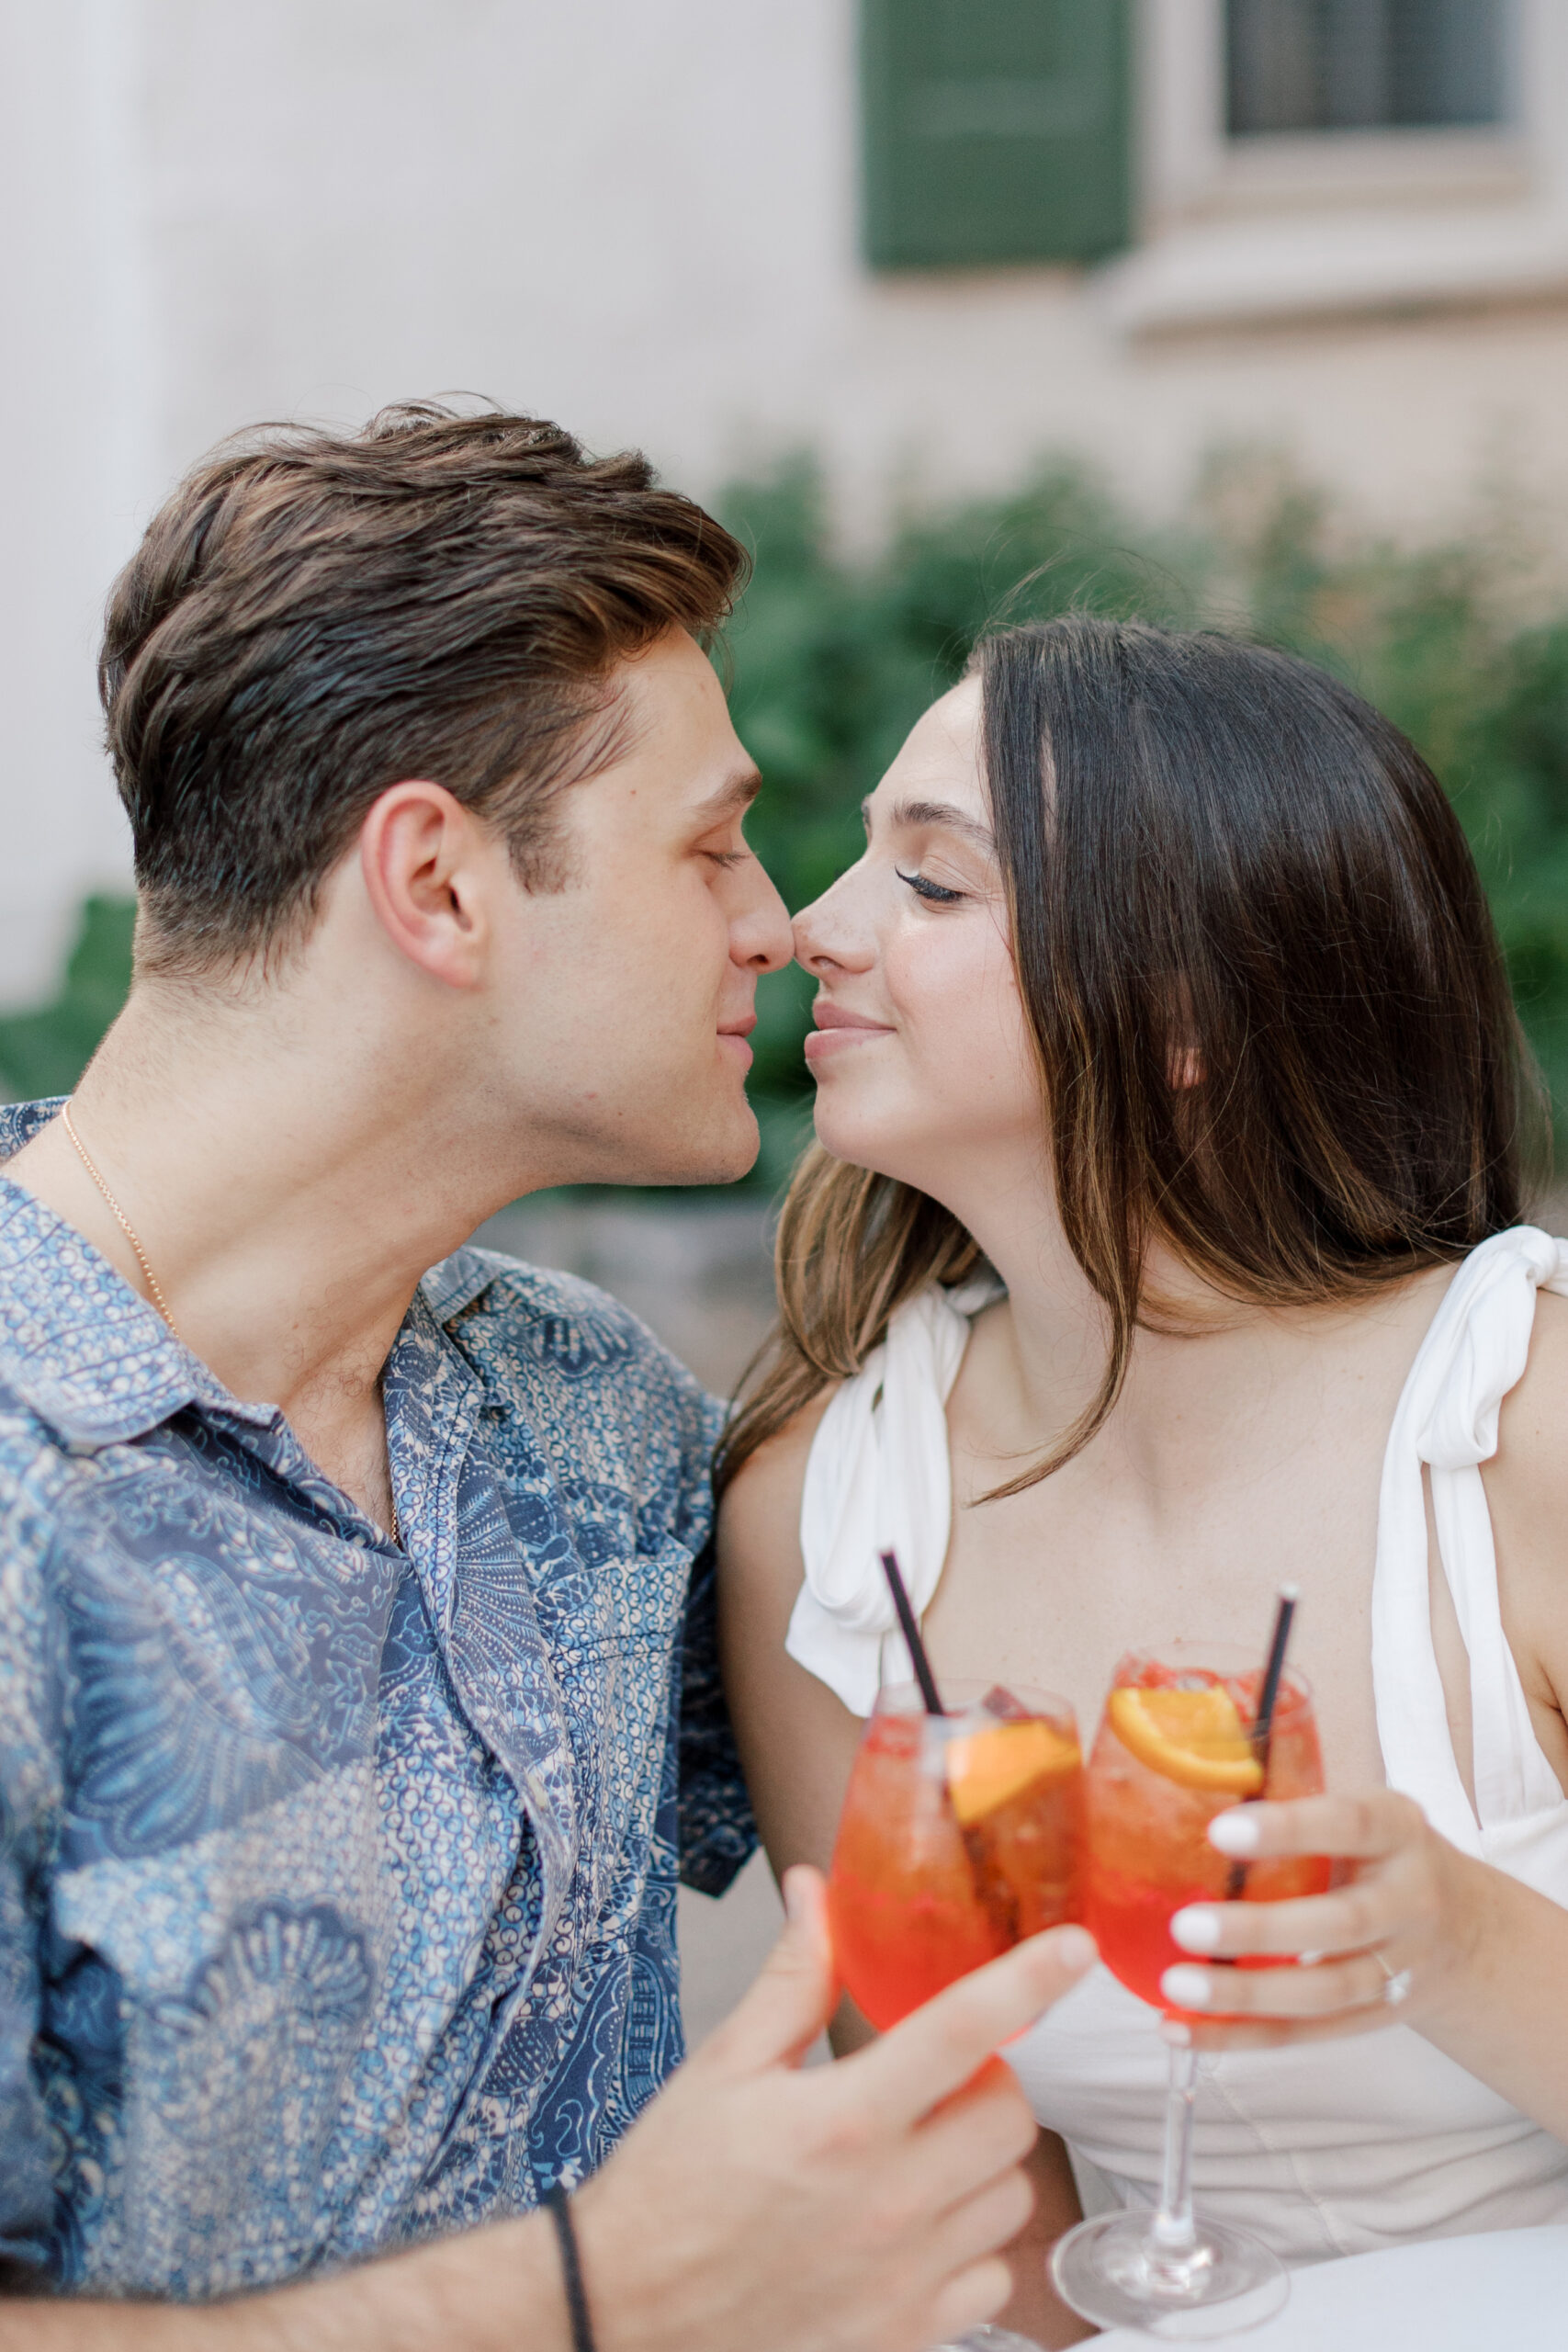 Couple with their noses touching with Aperol sprits | Image by Hope Helmuth Photography